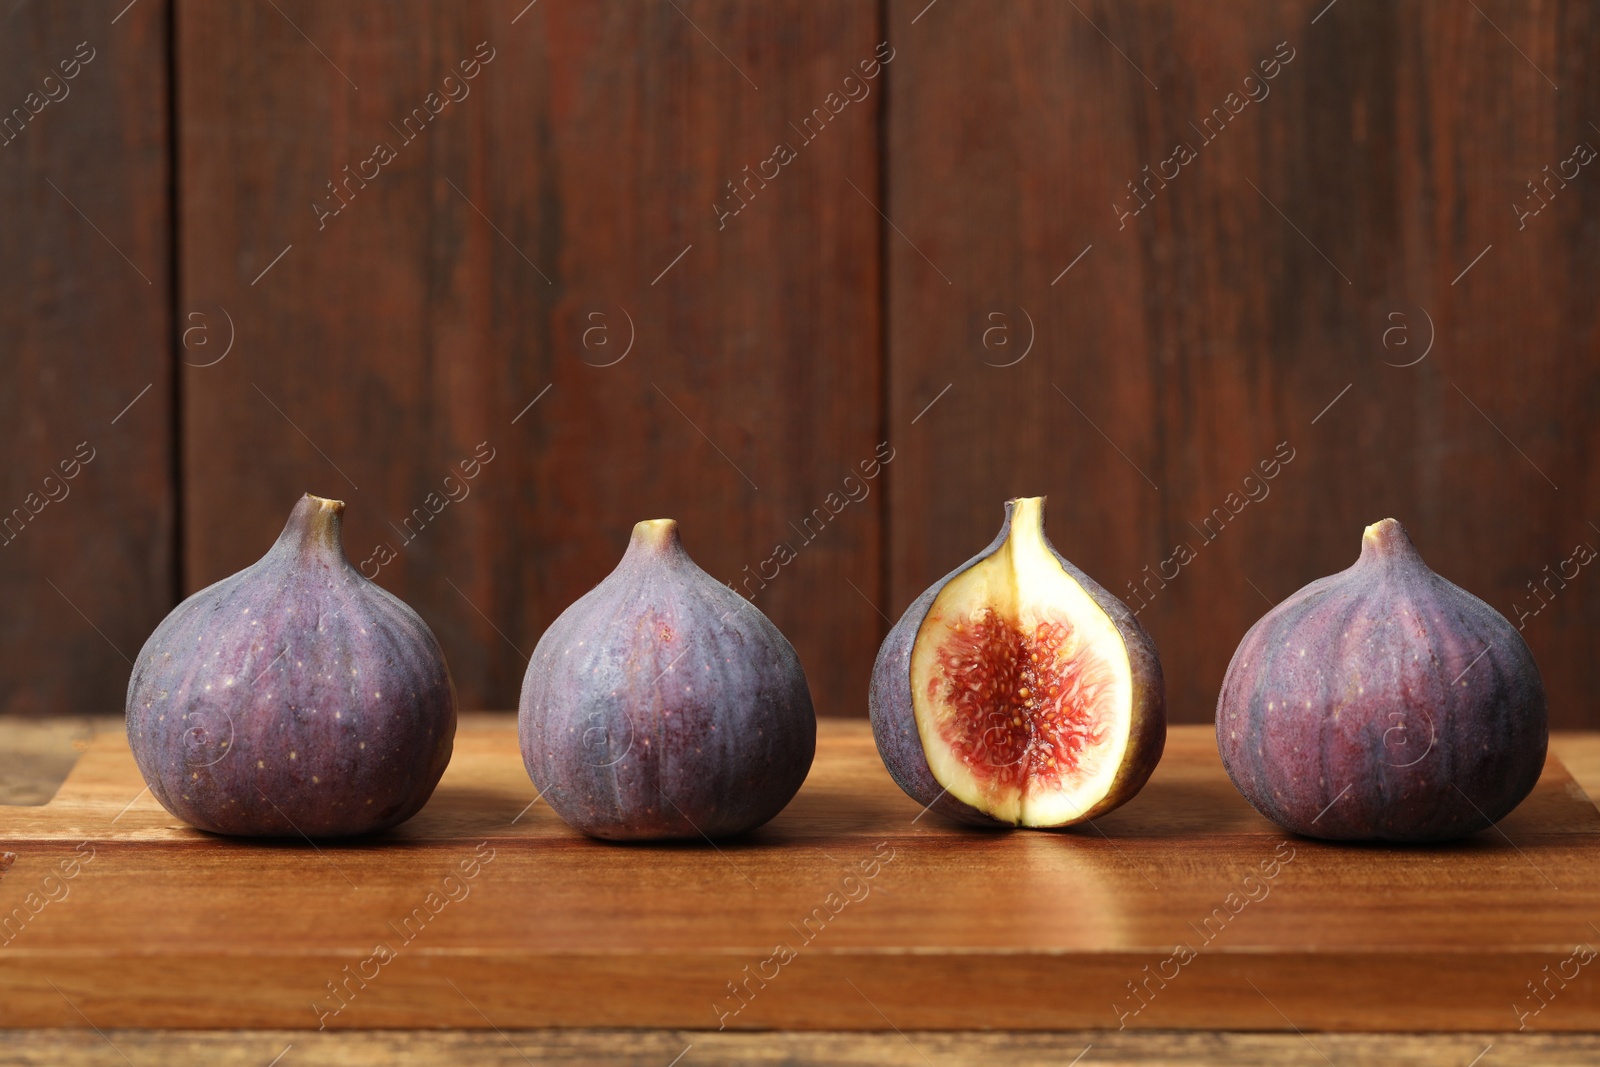 Photo of Whole and cut tasty fresh figs on wooden table